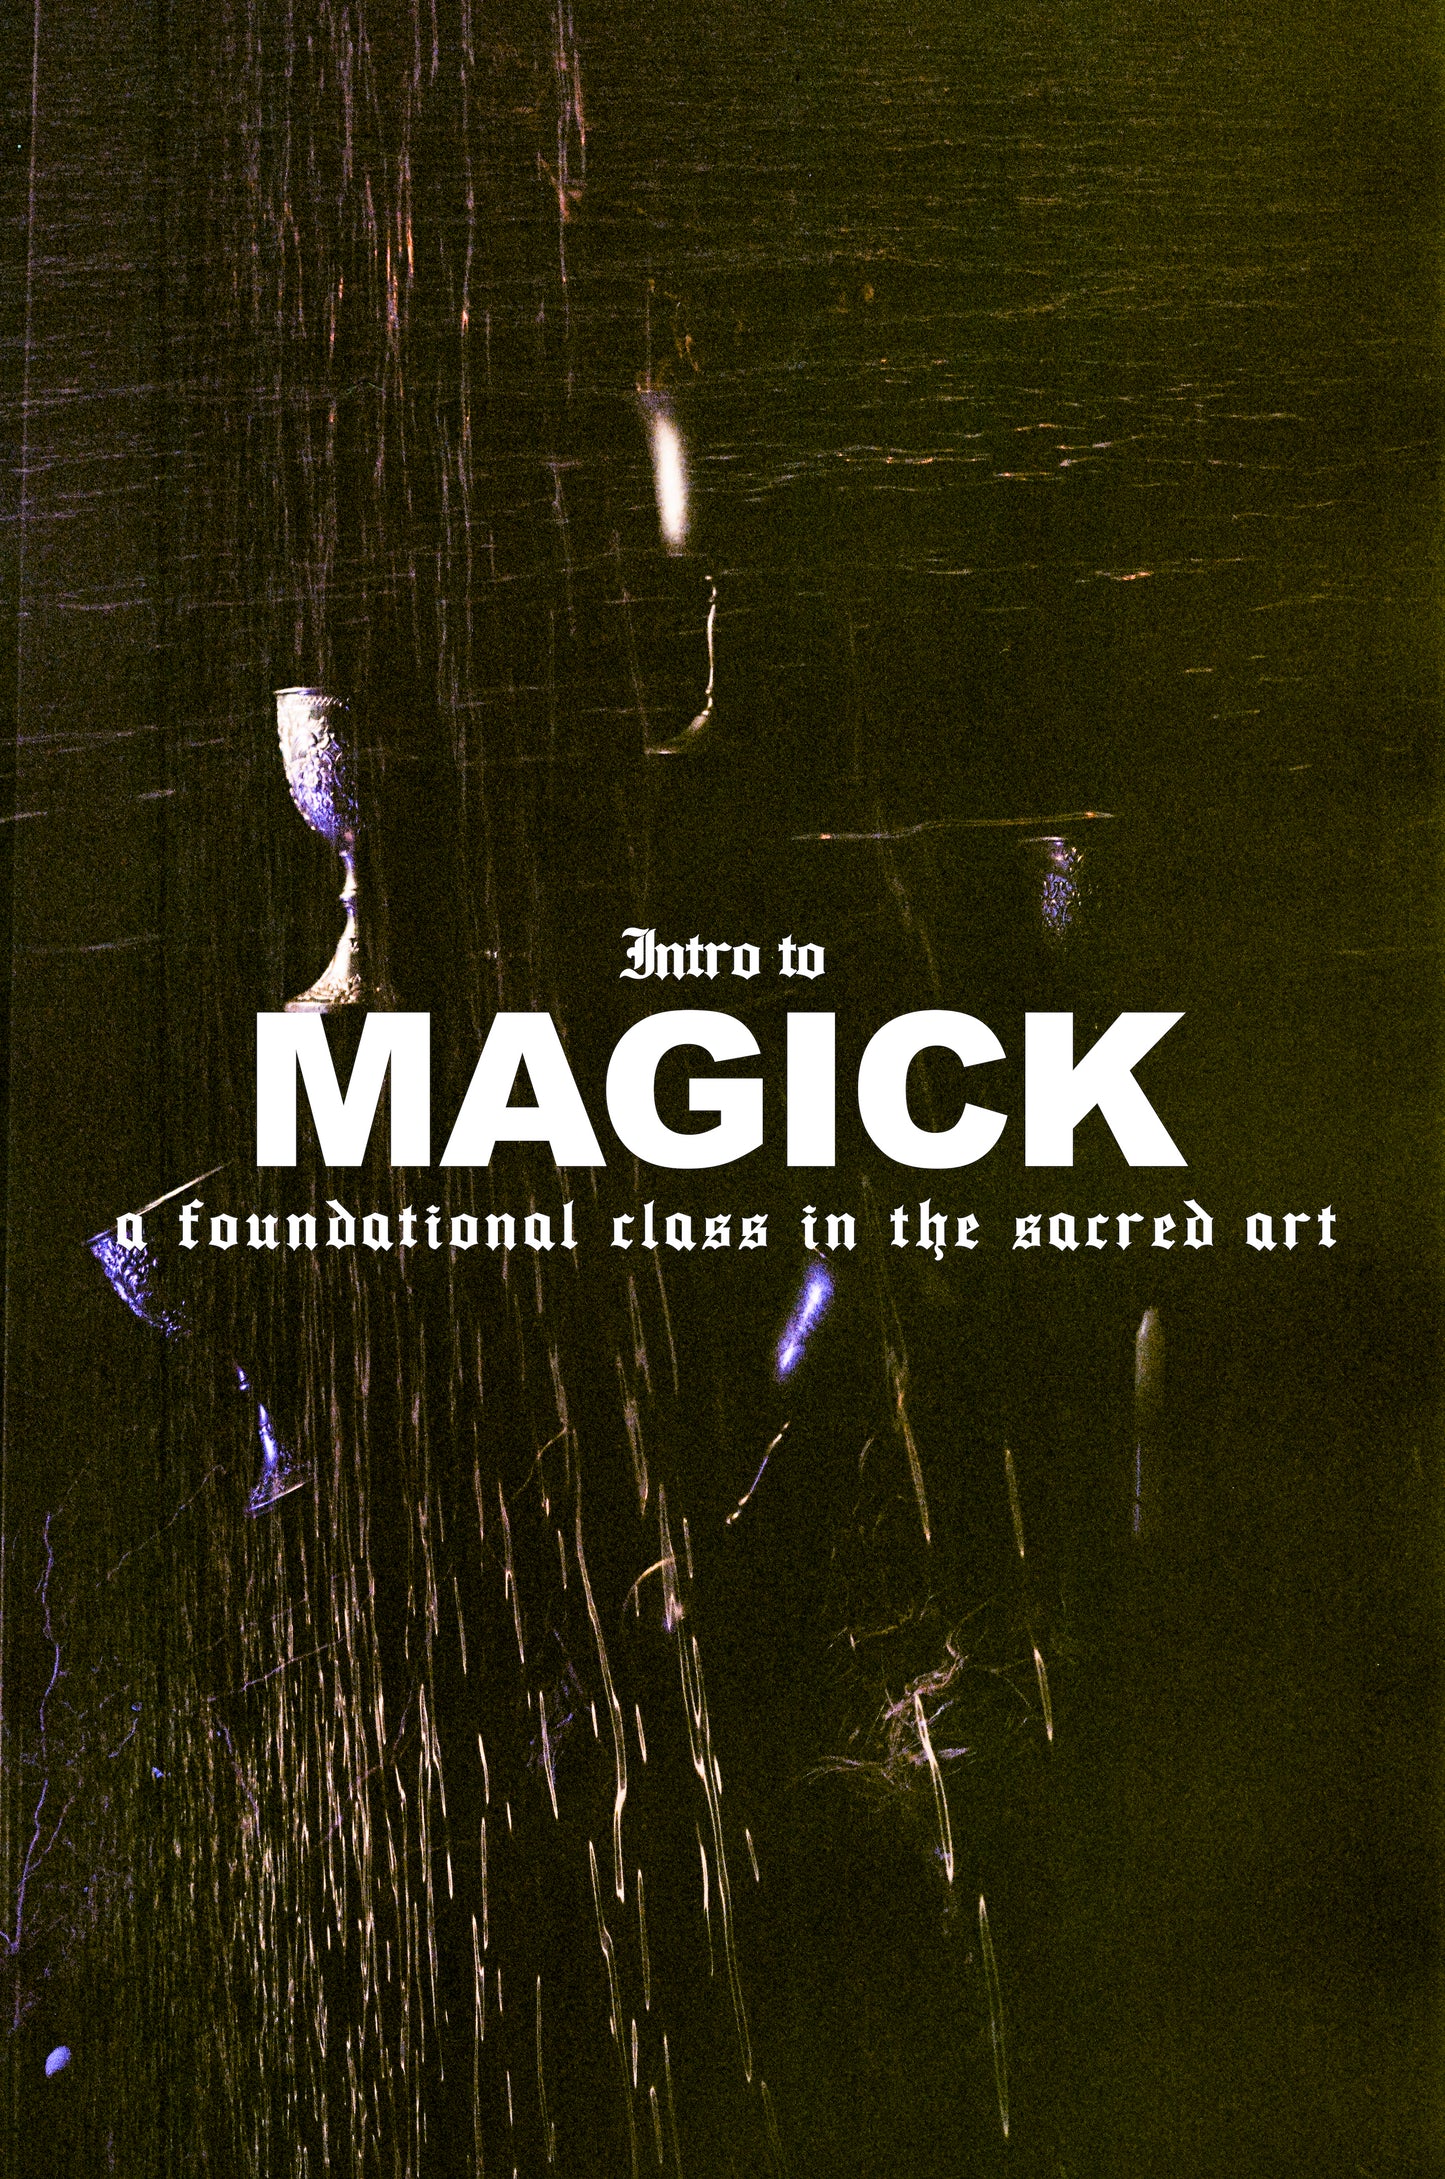 Foundations of Magick